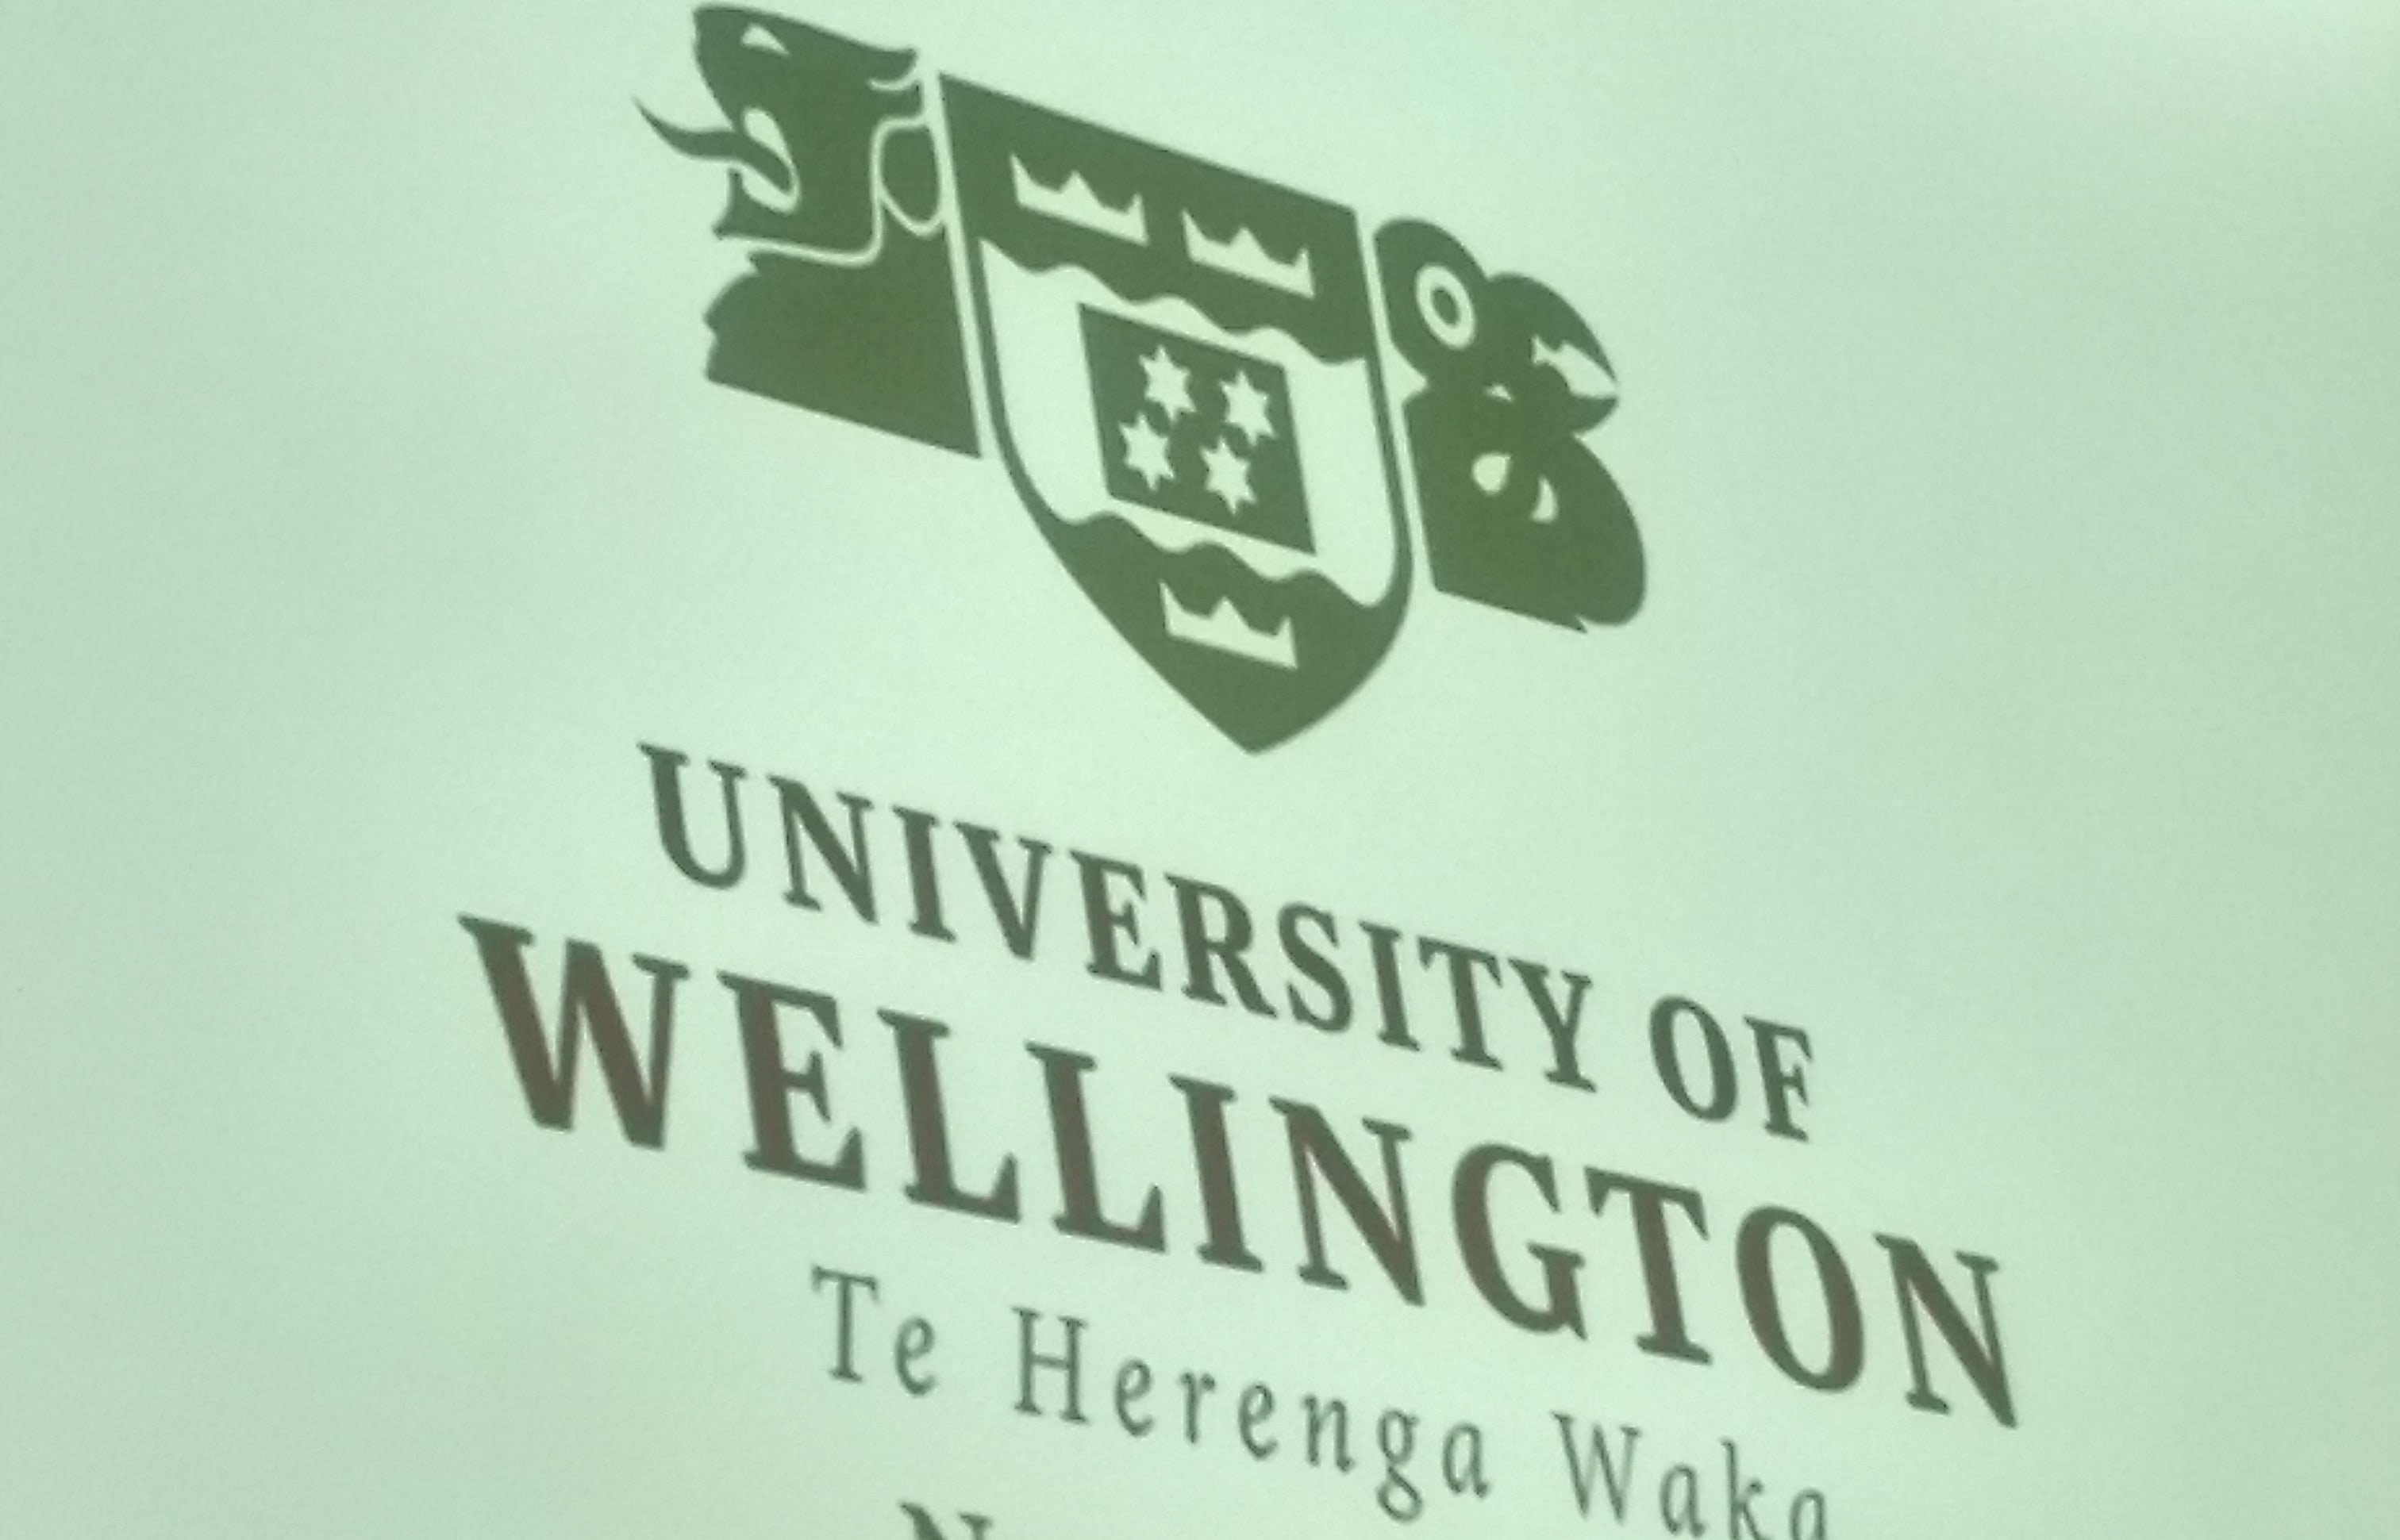 The proposed new logo for Victoria University of Wellington without on the former monarch in the name.